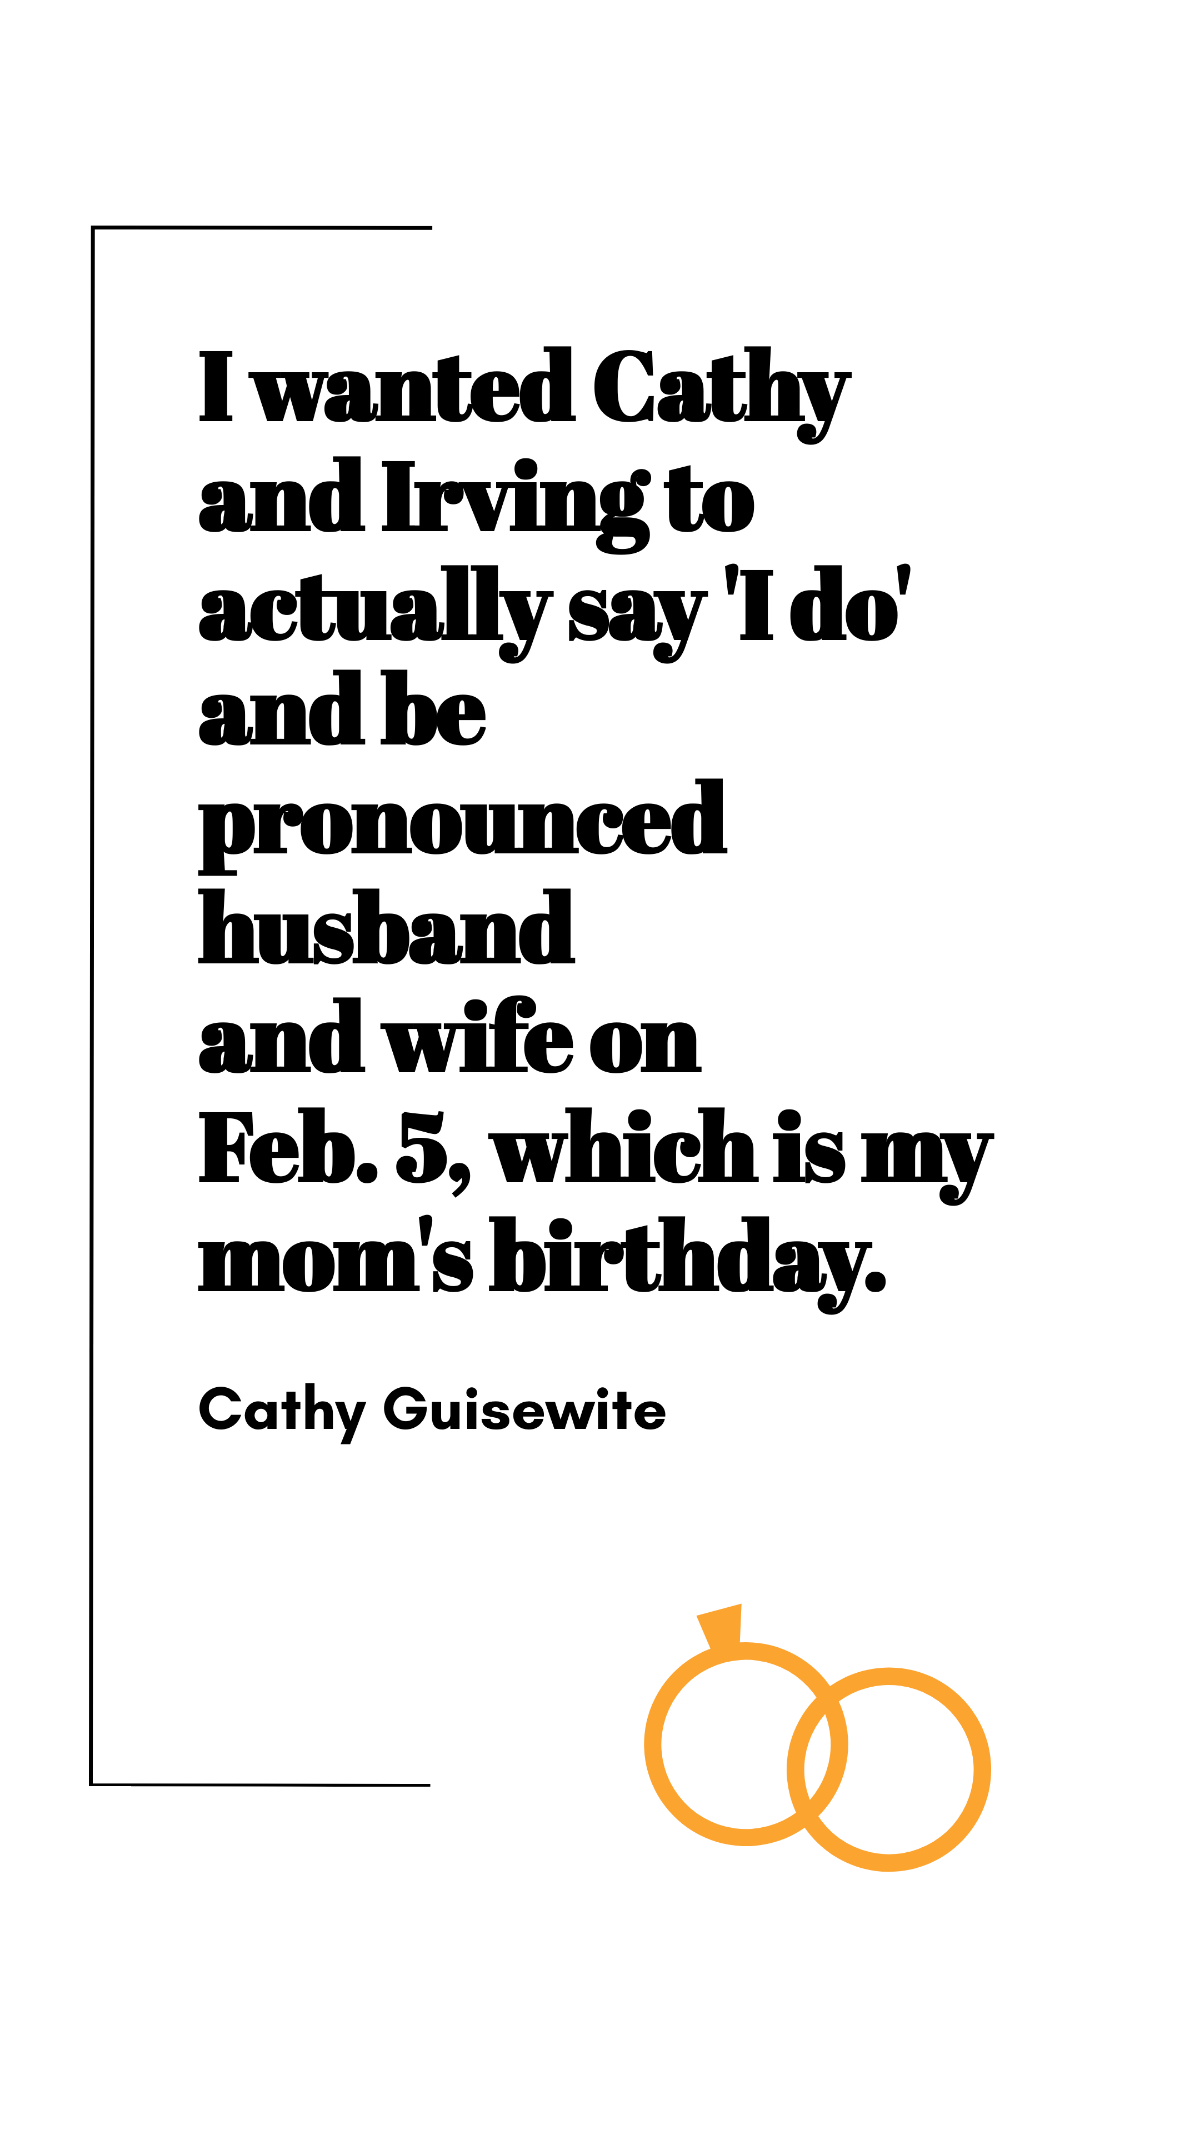 Cathy Guisewite - I wanted Cathy and Irving to actually say 'I do' and be pronounced husband and wife on Feb. 5, which is my mom's birthday.